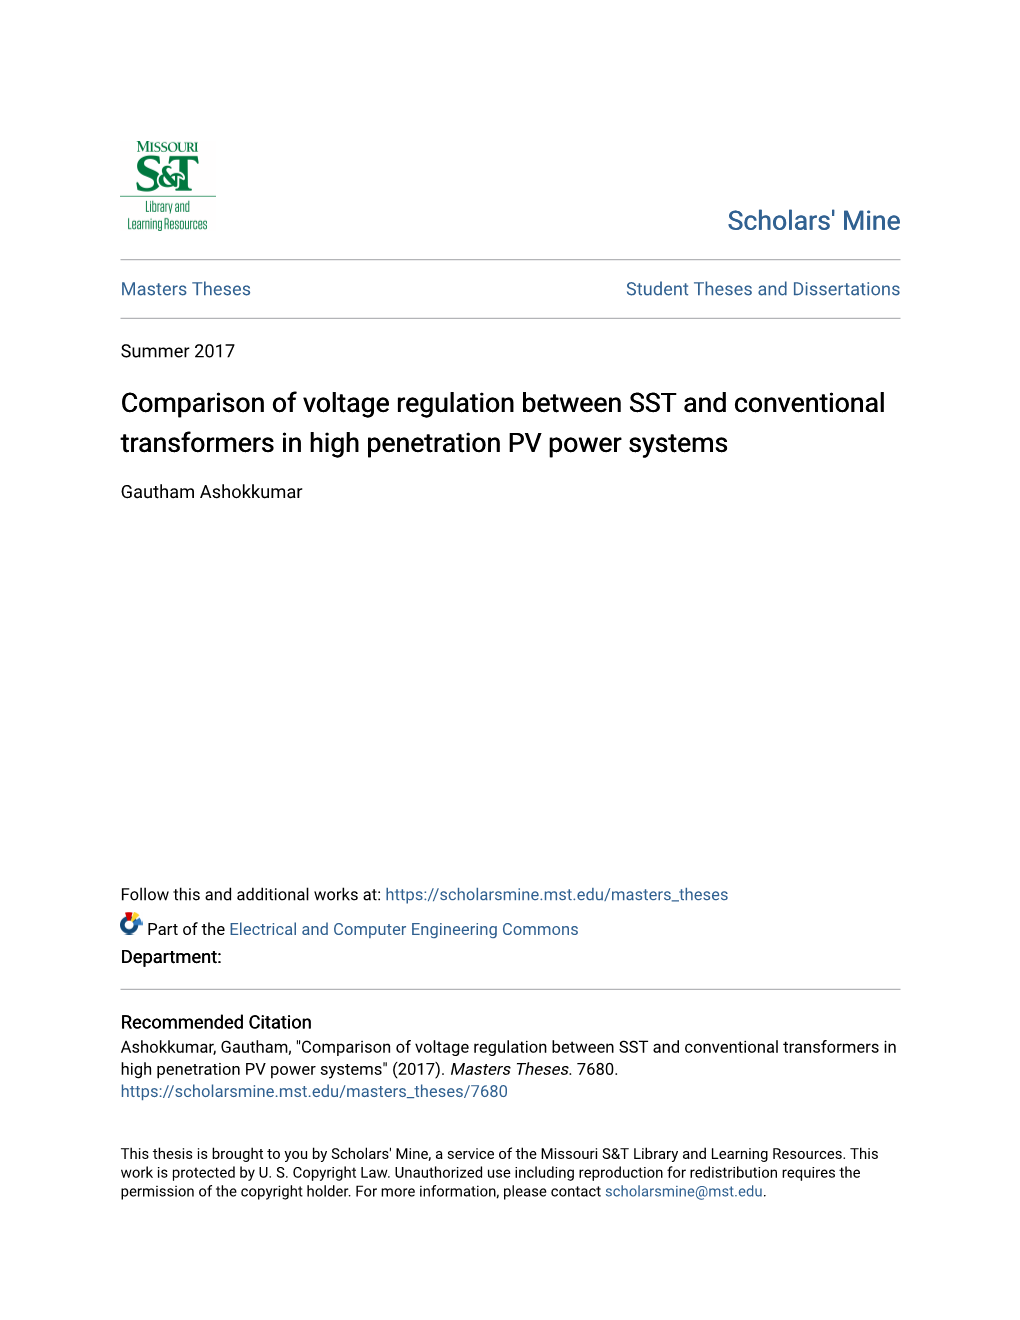 Comparison of Voltage Regulation Between SST and Conventional Transformers in High Penetration PV Power Systems